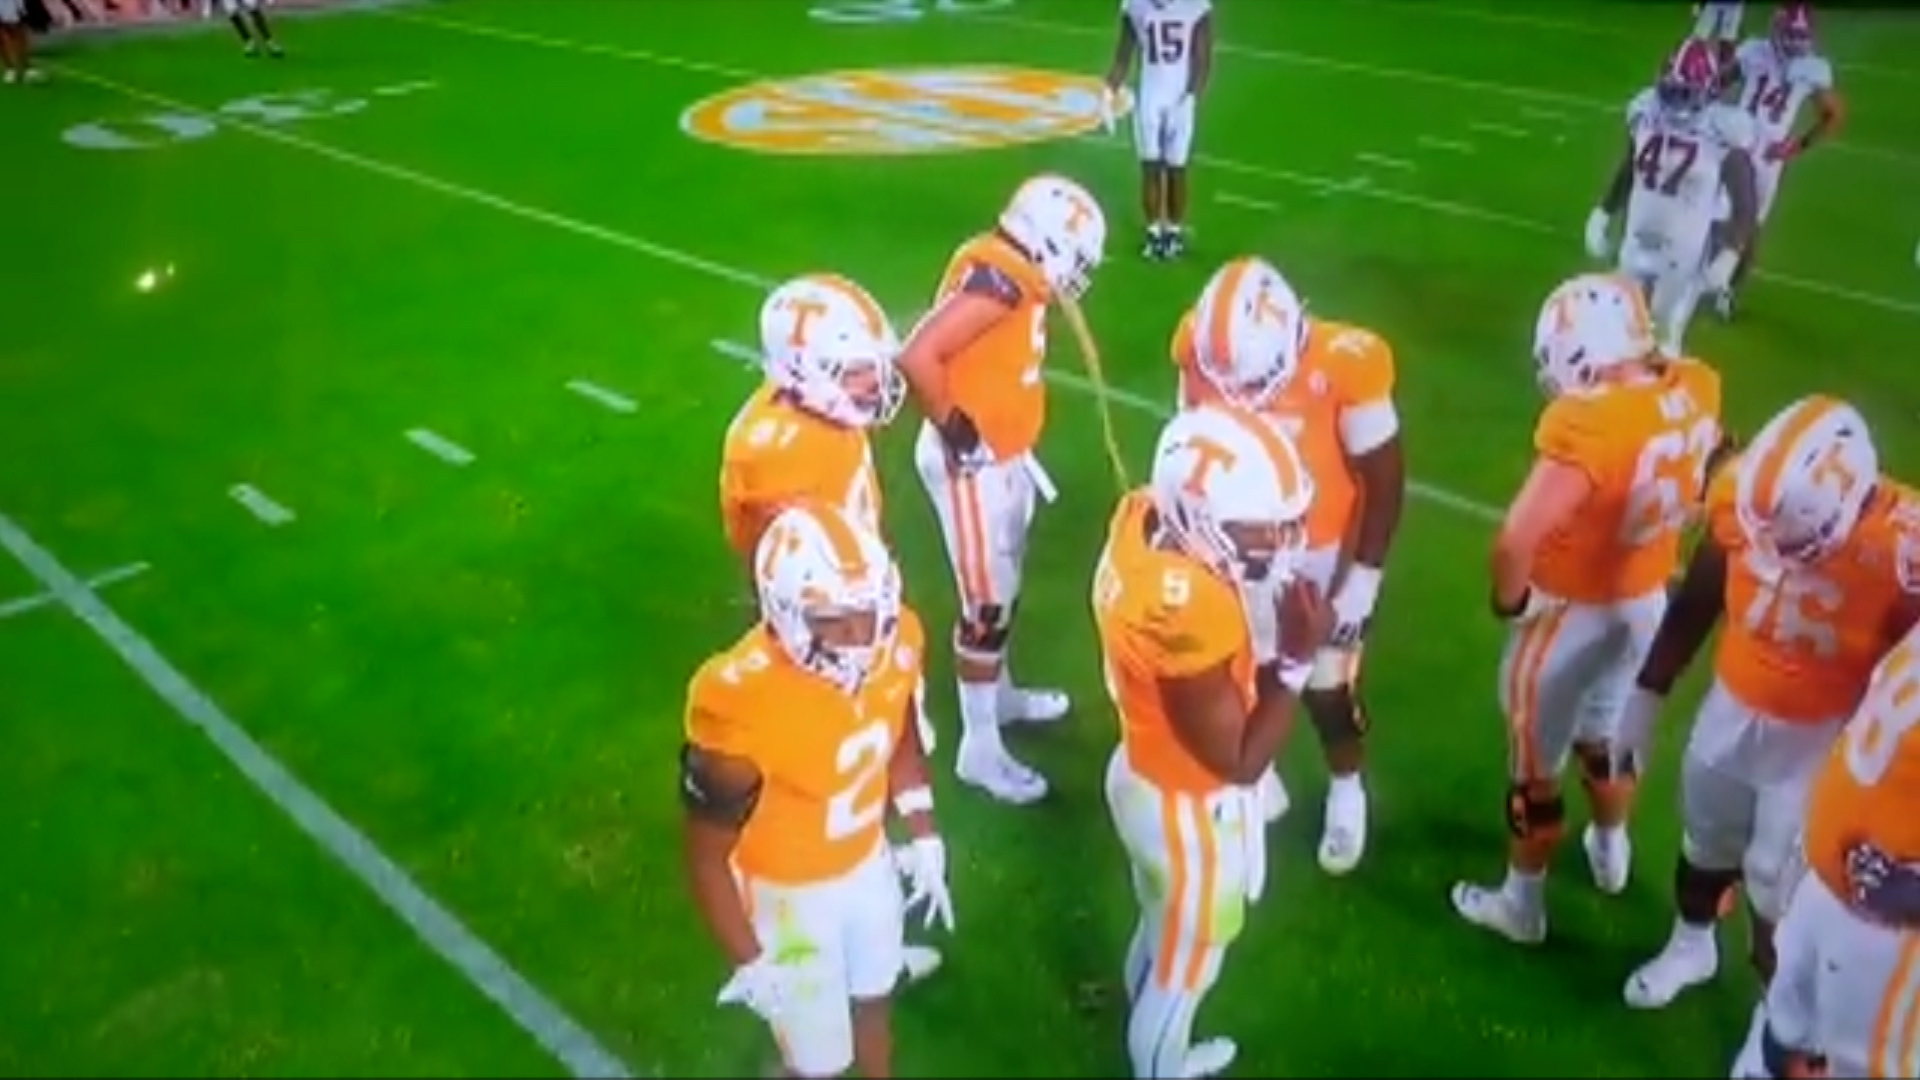 Tennessee player Jeramiah Crawford uses vomit as intimidation tactic